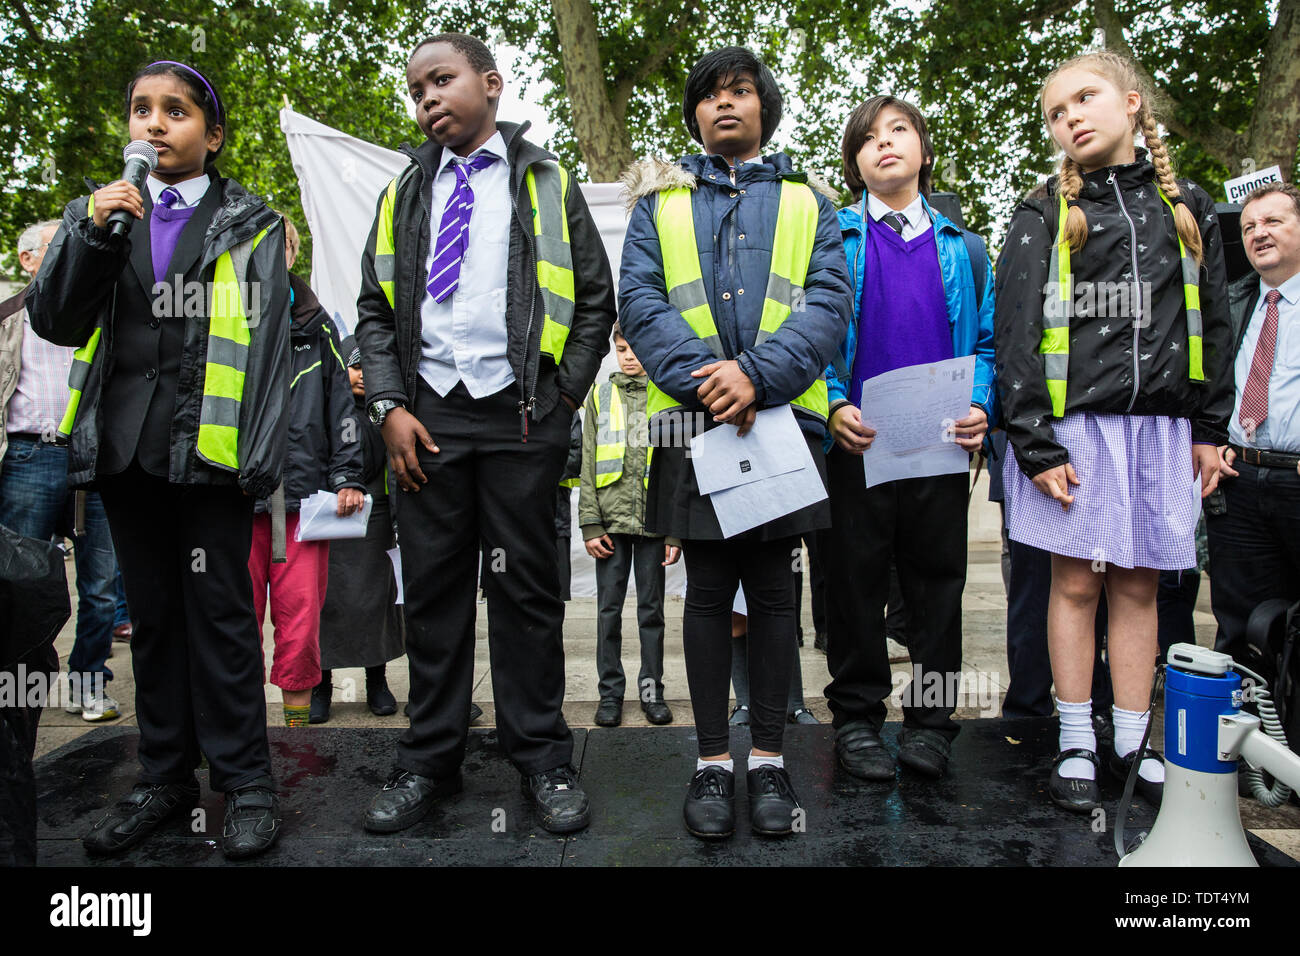 London, UK. 18 June, 2019. Children from the Hugh Myddelton Primary School Refugee Committee address a demonstration in Parliament Square to demand that the Government resettle 10,000 children over 10 years. As part of Lord Dubs’ ‘Our Turn’ campaign, councils around the UK have already pledged places for over 1,100 children if the Government should make a new resettlement commitment.  Credit: Mark Kerrison/Alamy Live News Stock Photo